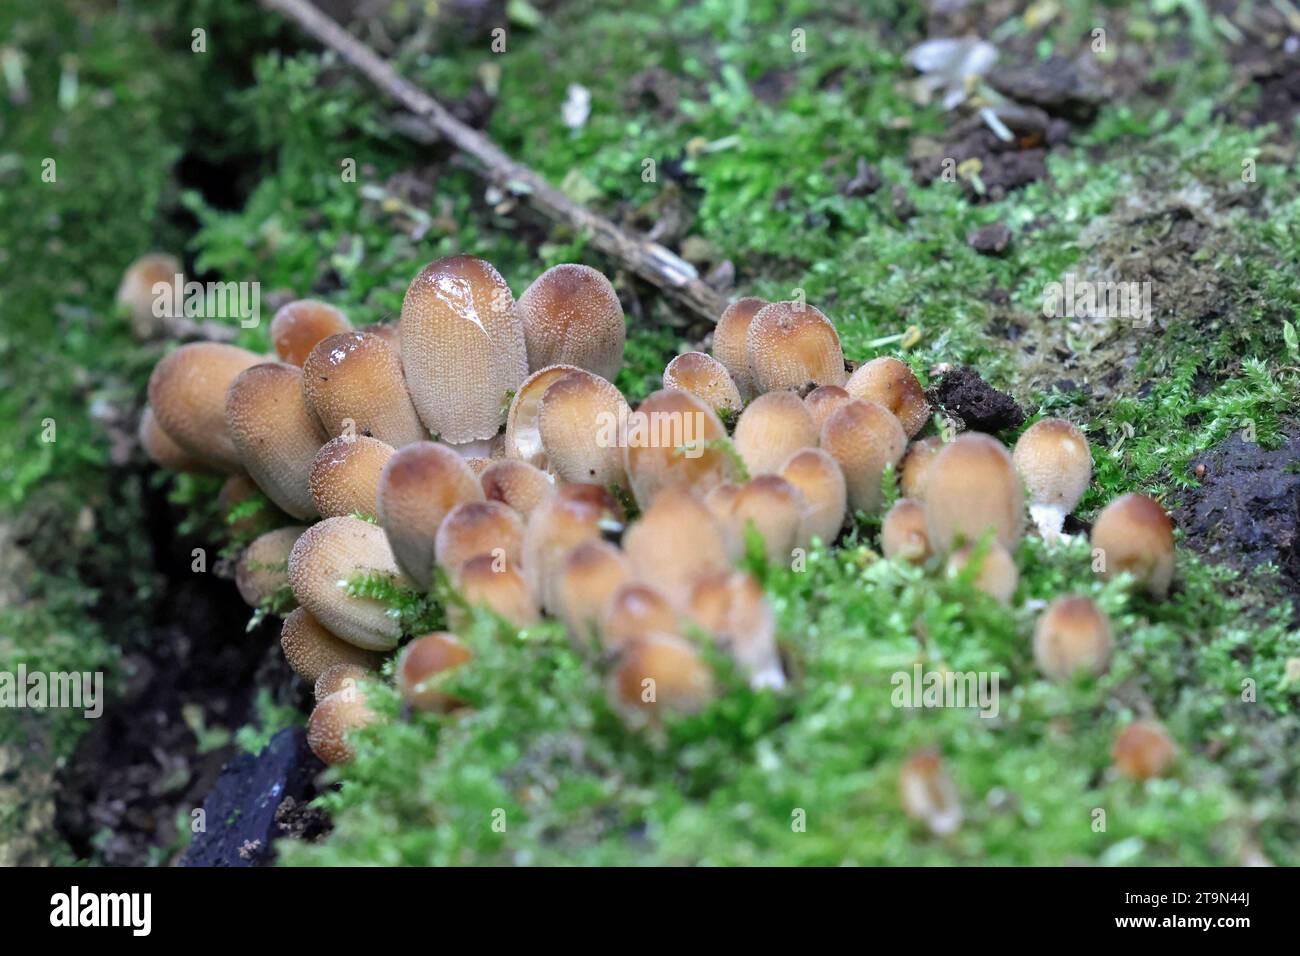 A small clump of fungus on a rotting log Stock Photo